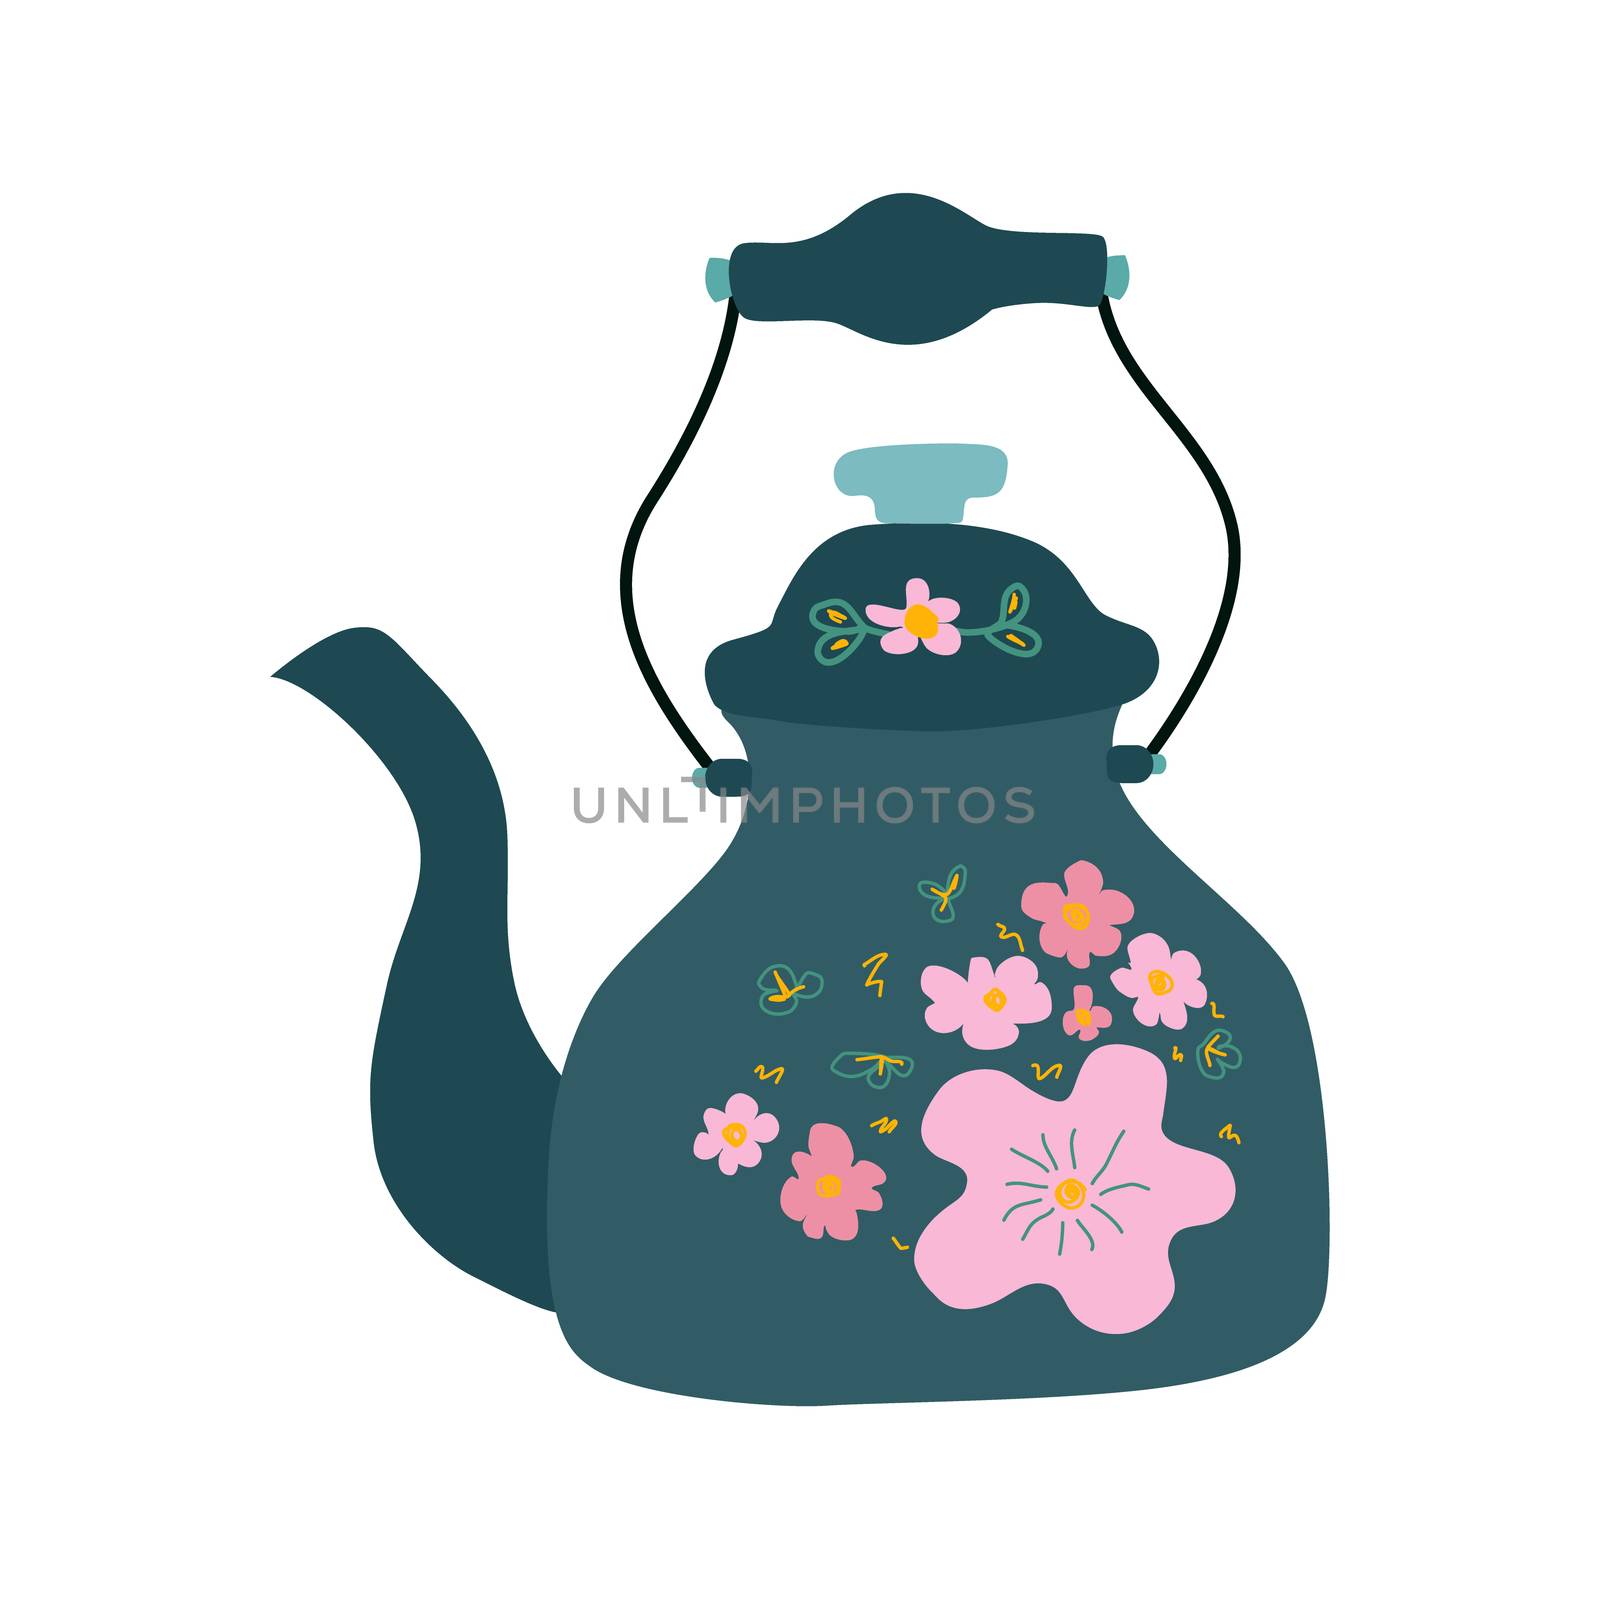 Retro kettle teal color with pink floral decor. Isolated on white background. Flat cartoon style. Vector Illustration.